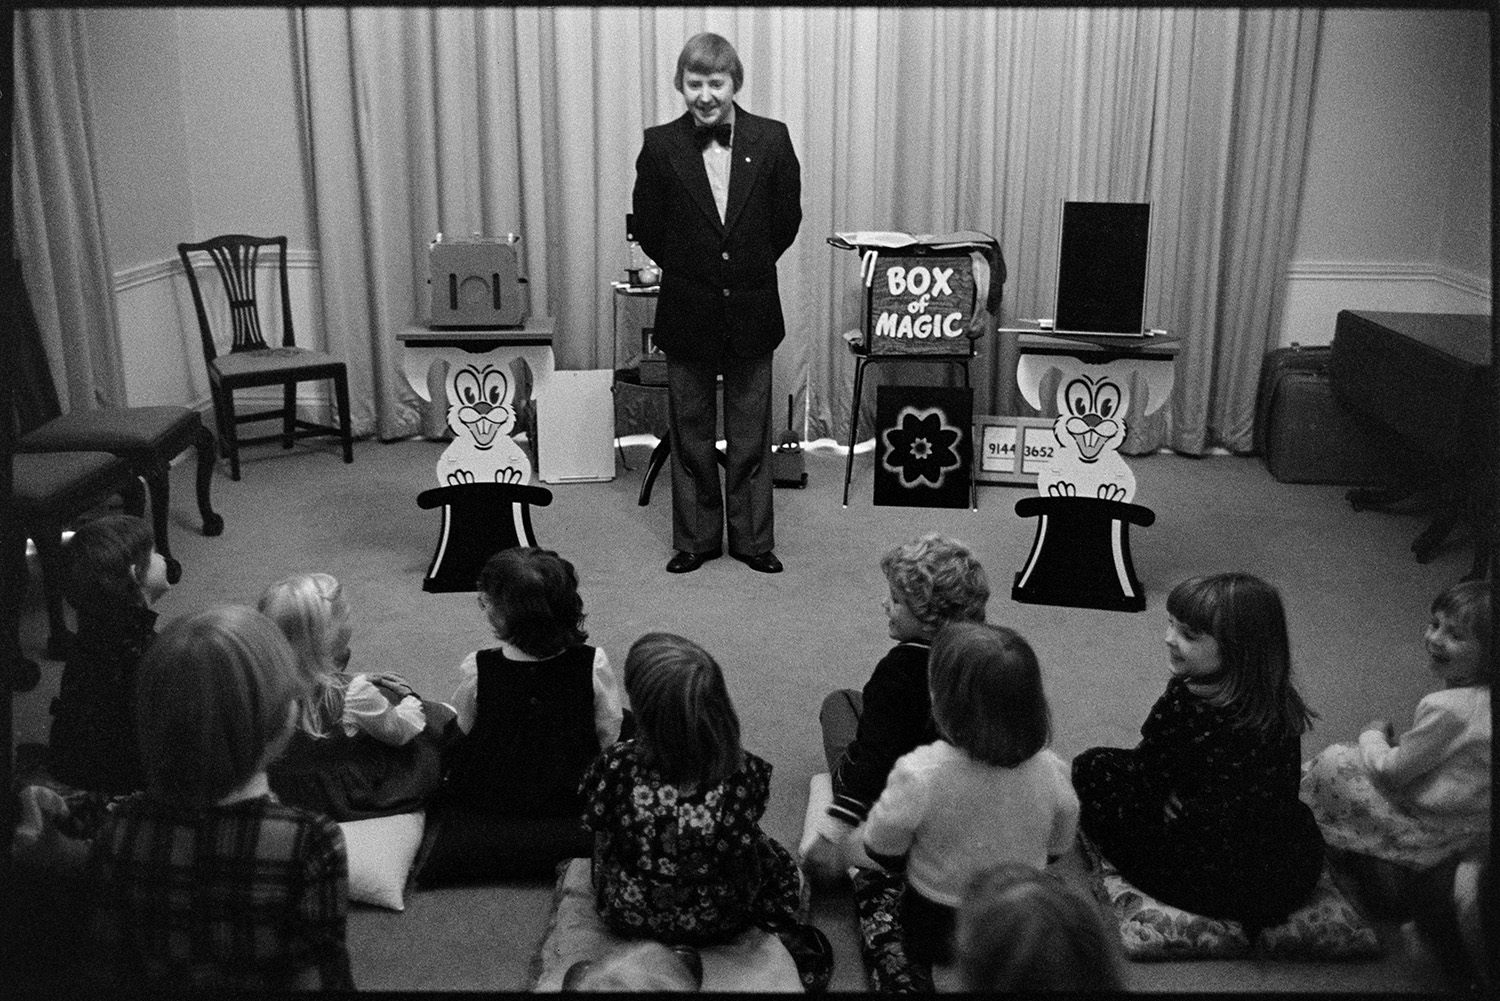 Conjurer entertaining children at birthday party. 
[A magician entertaining children at the 6th birthday of Hilary and Roger Hill's child, at Marwood House.]